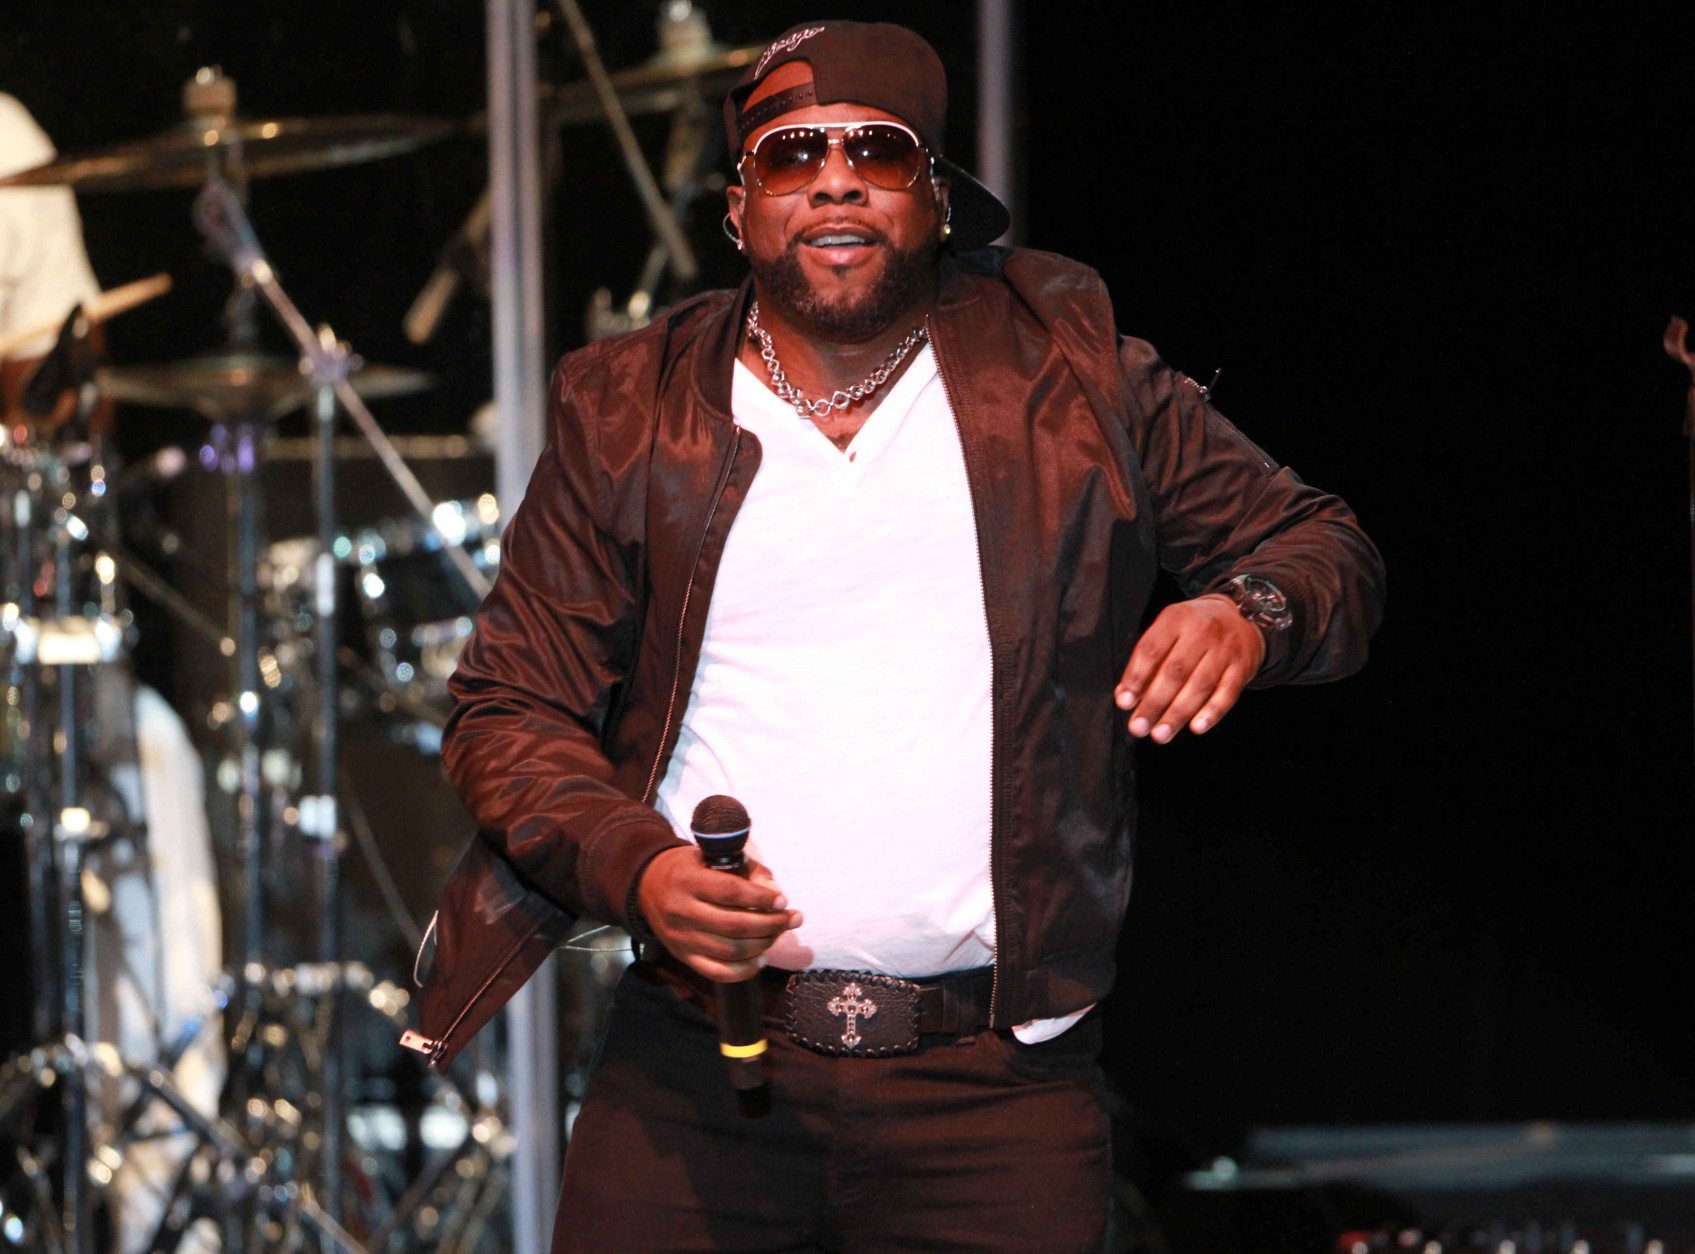 Nathan Morris with Boyz II Men performs at Chastain Park Amphitheater on Friday, August 28, 2015, in Atlanta. (Photo by Robb D. Cohen/Invision/AP)